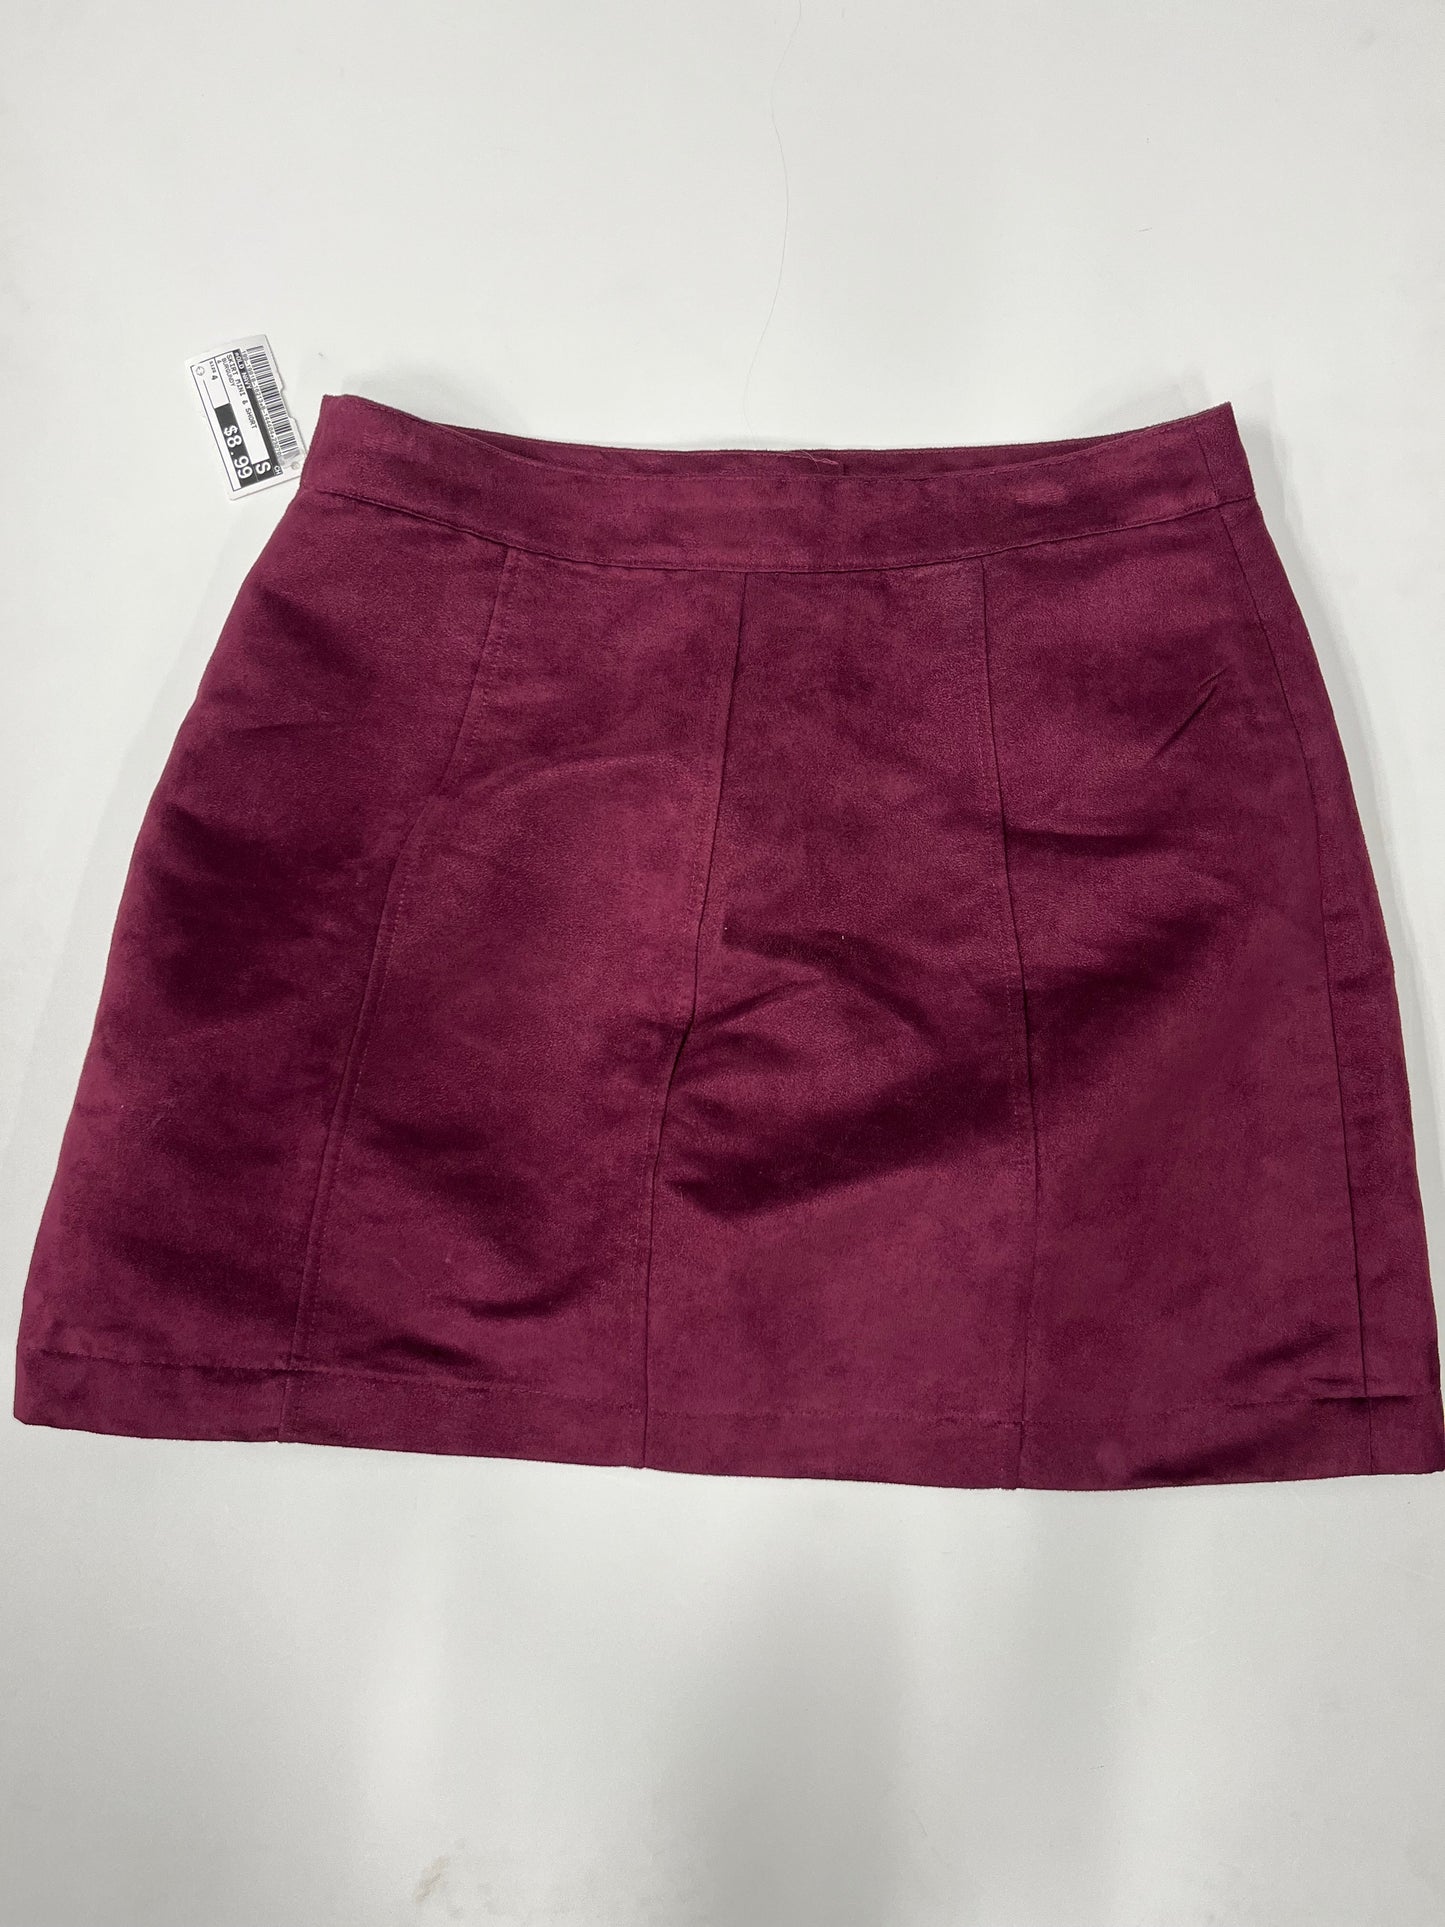 Skirt Mini & Short By Old Navy  Size: 4